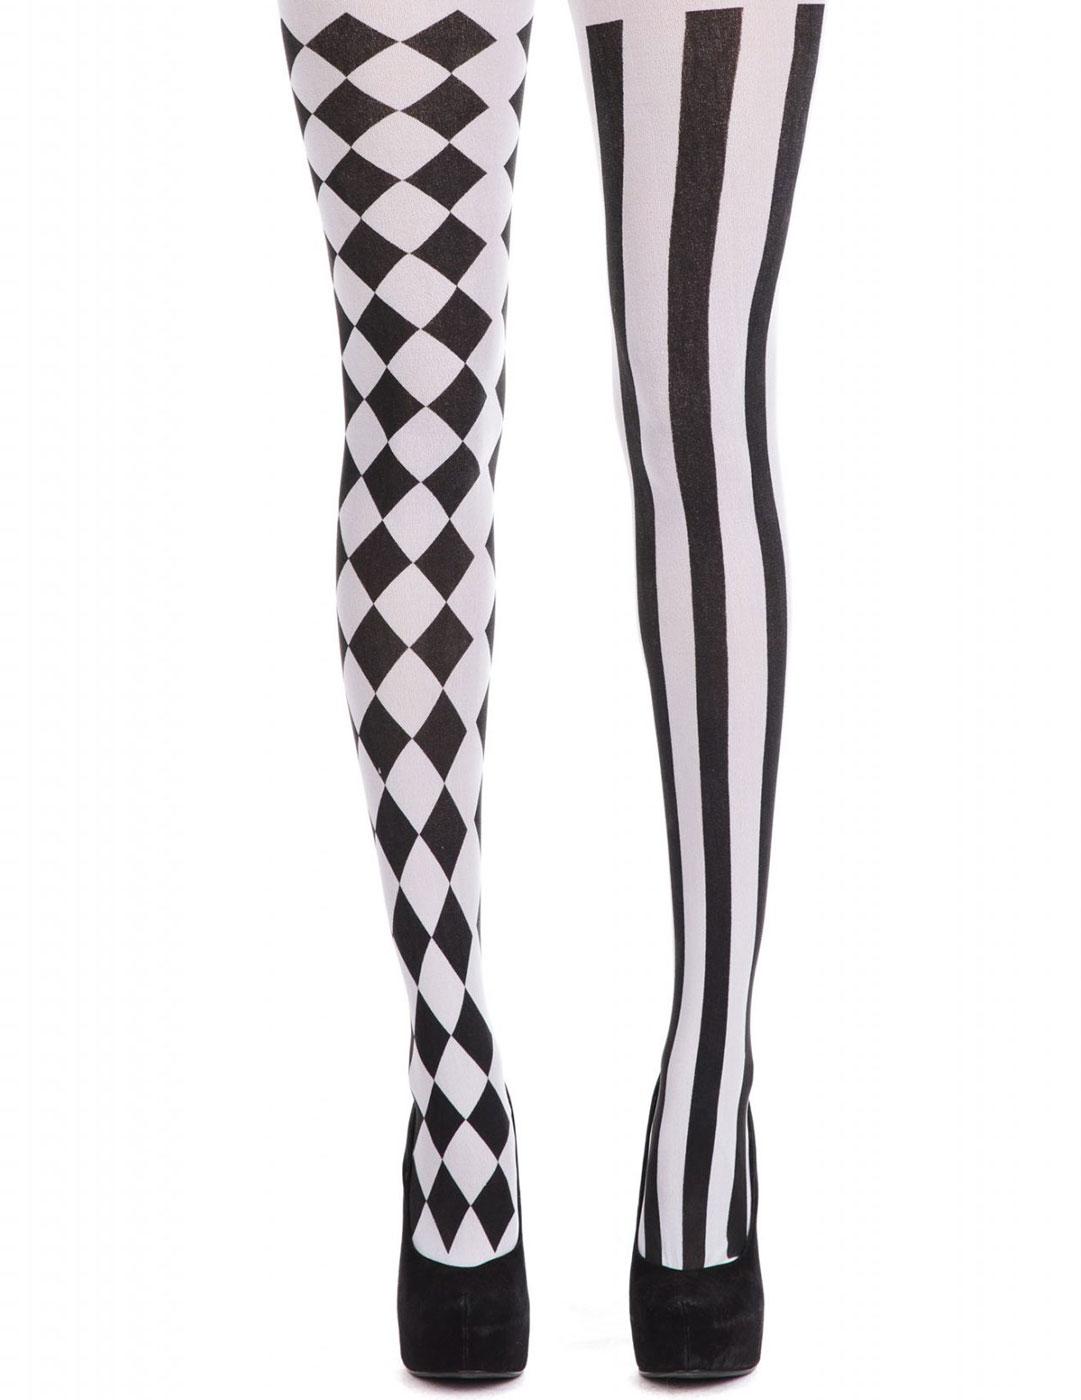 Black and white Harlequin Tights with diamonds on one leg and stripes on the other! By Bristol Novelties BA998 available here at Karnival Costumes online party shop